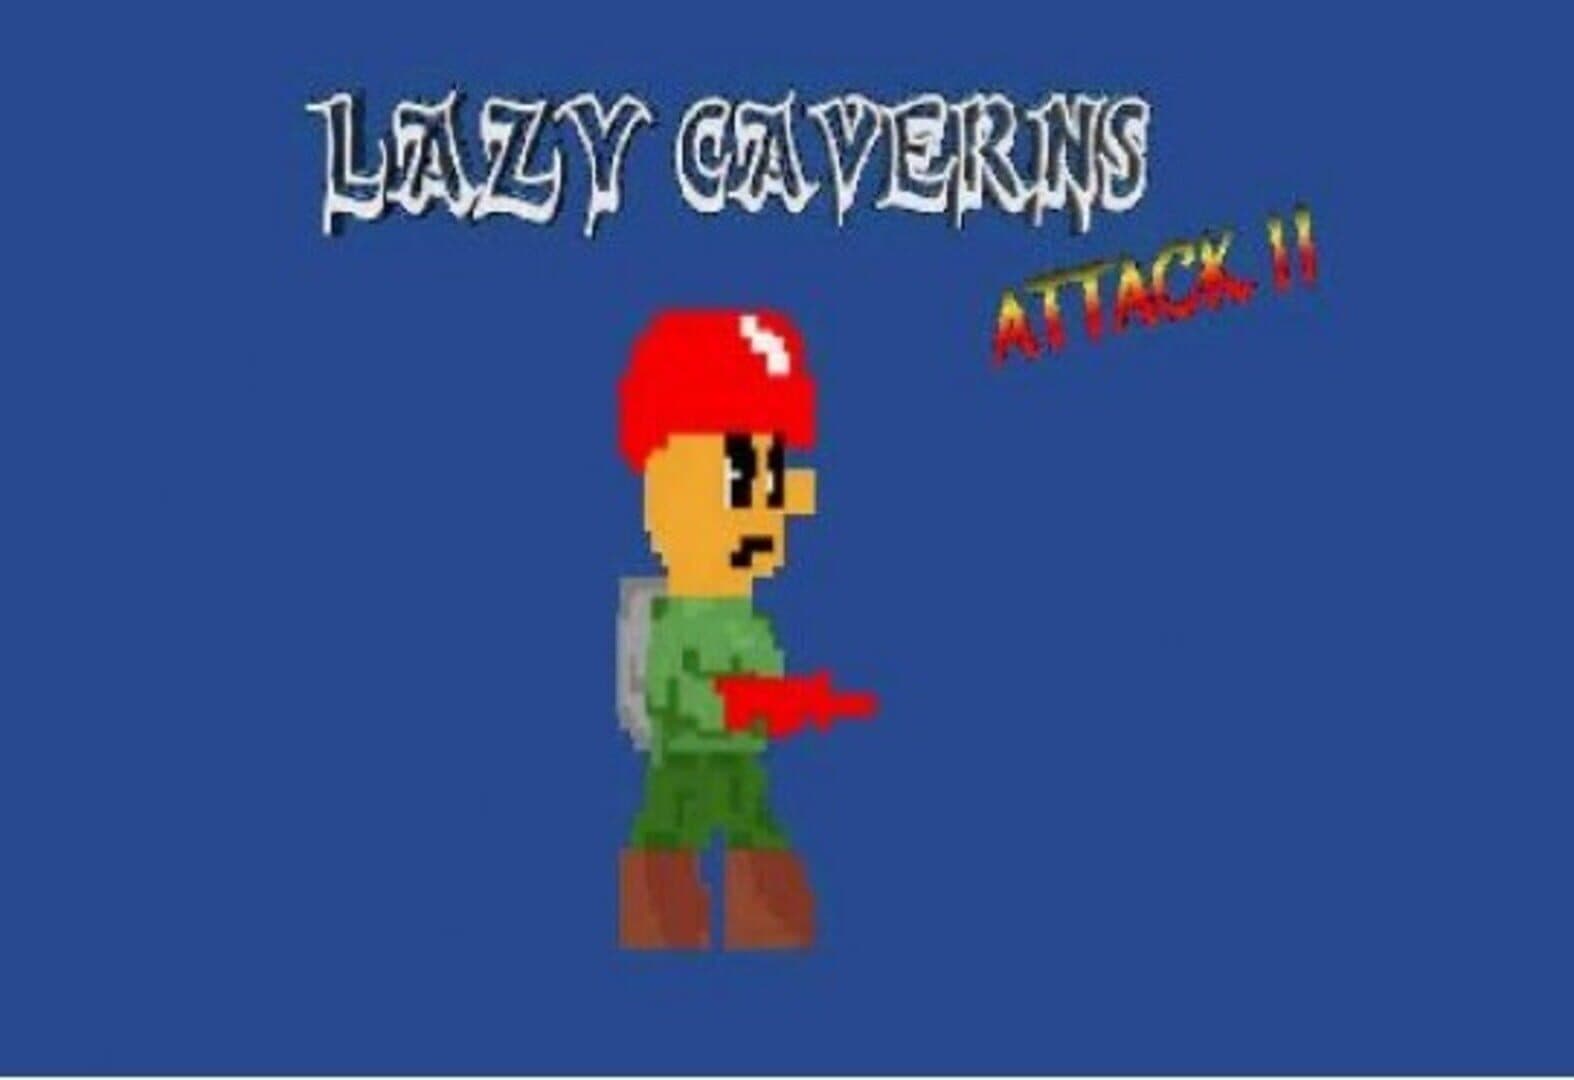 Lazy Caverns Attack!! cover art